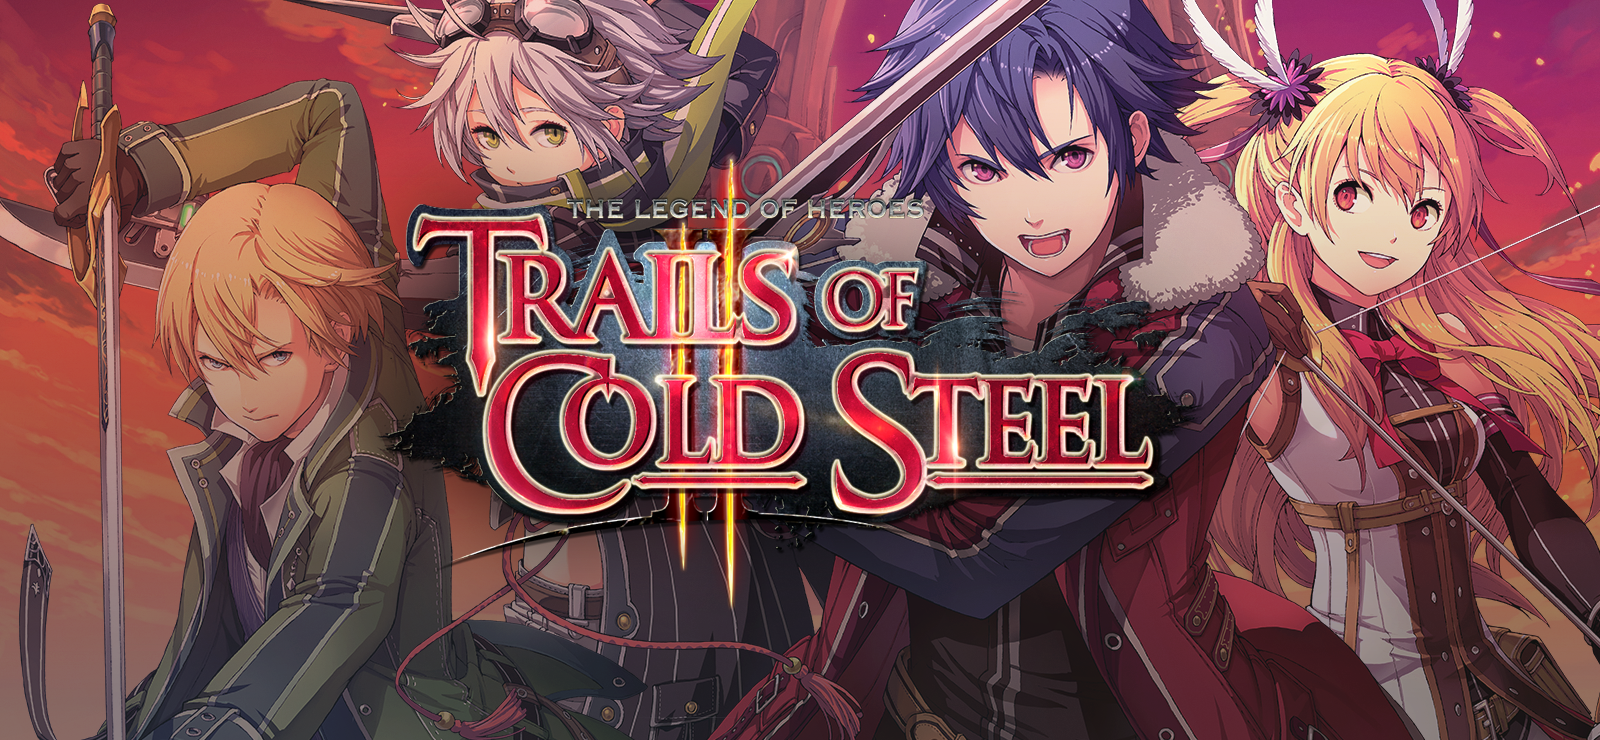 The Legend Of Heroes: Trails Of Cold Steel II - Shining Pom Bait Value Set 2